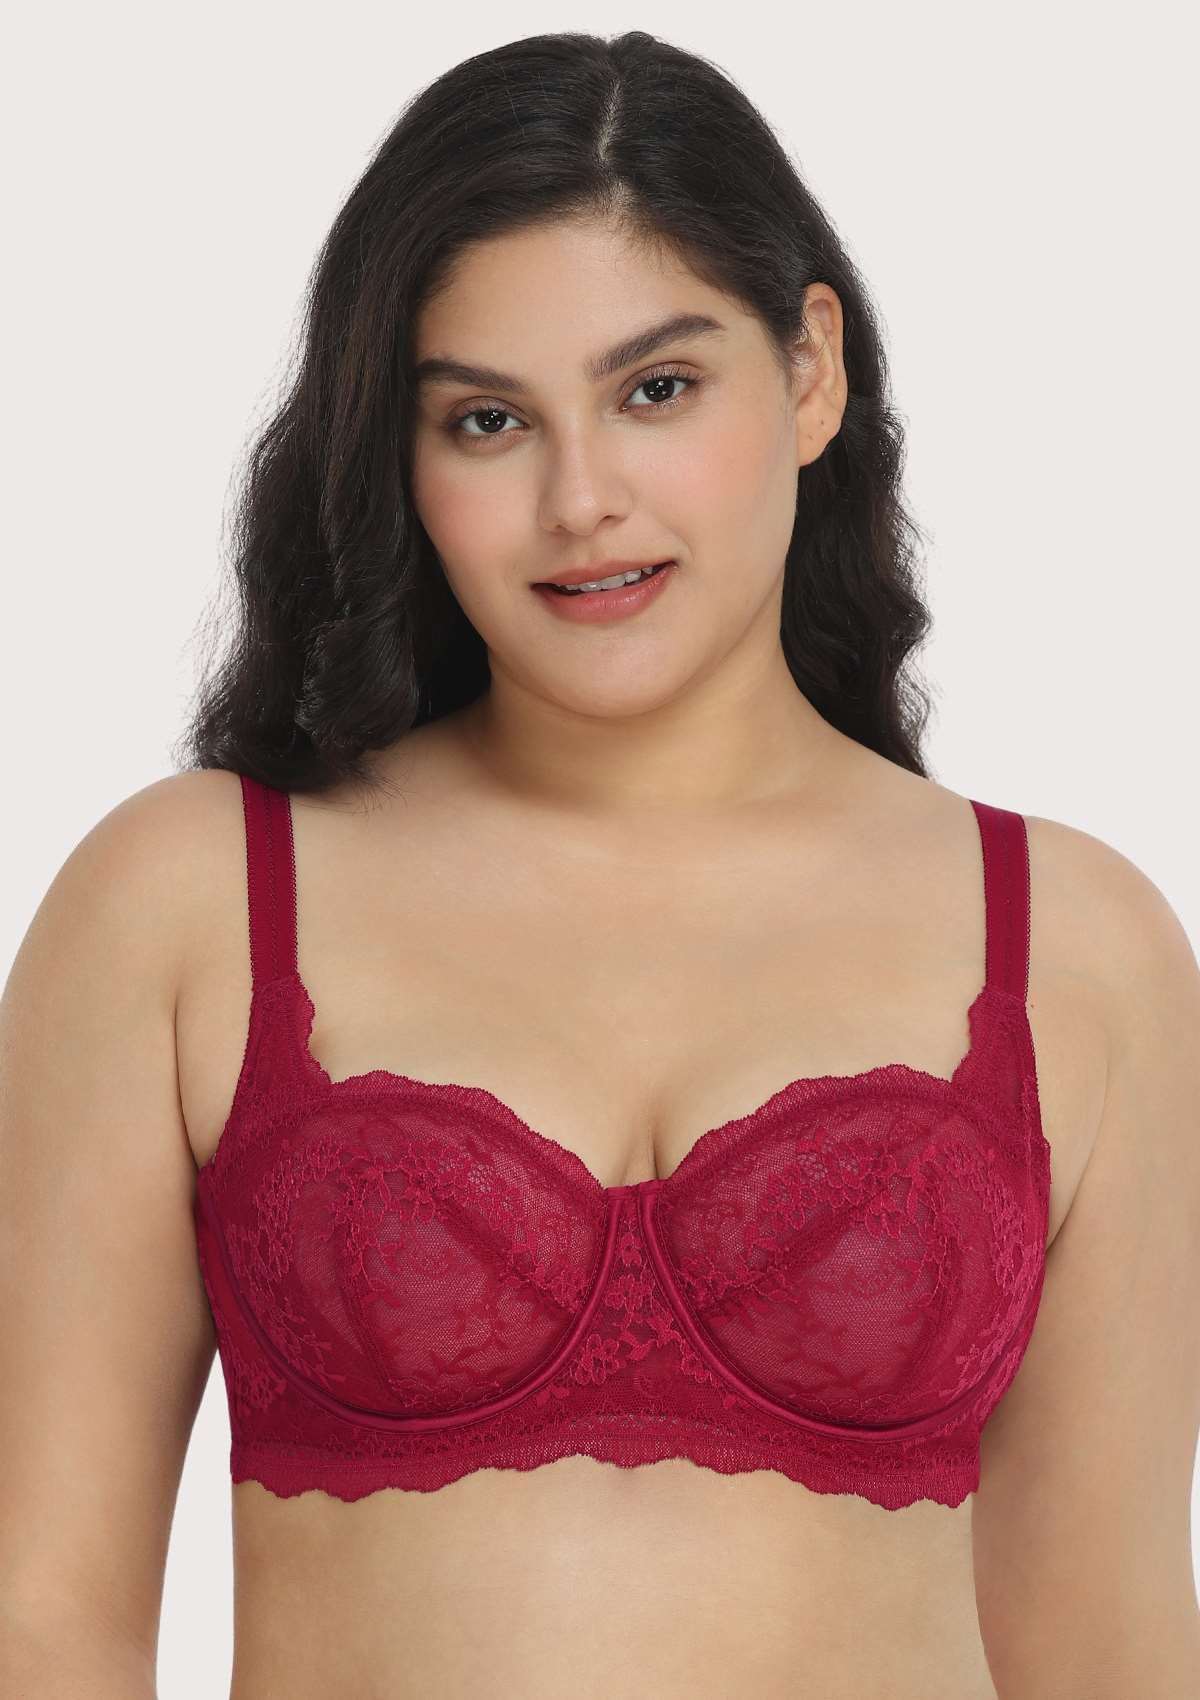 HSIA Floral Lace Unlined Bridal Balconette Bra Set - Supportive Classic - Burgundy / 34 / DD/E